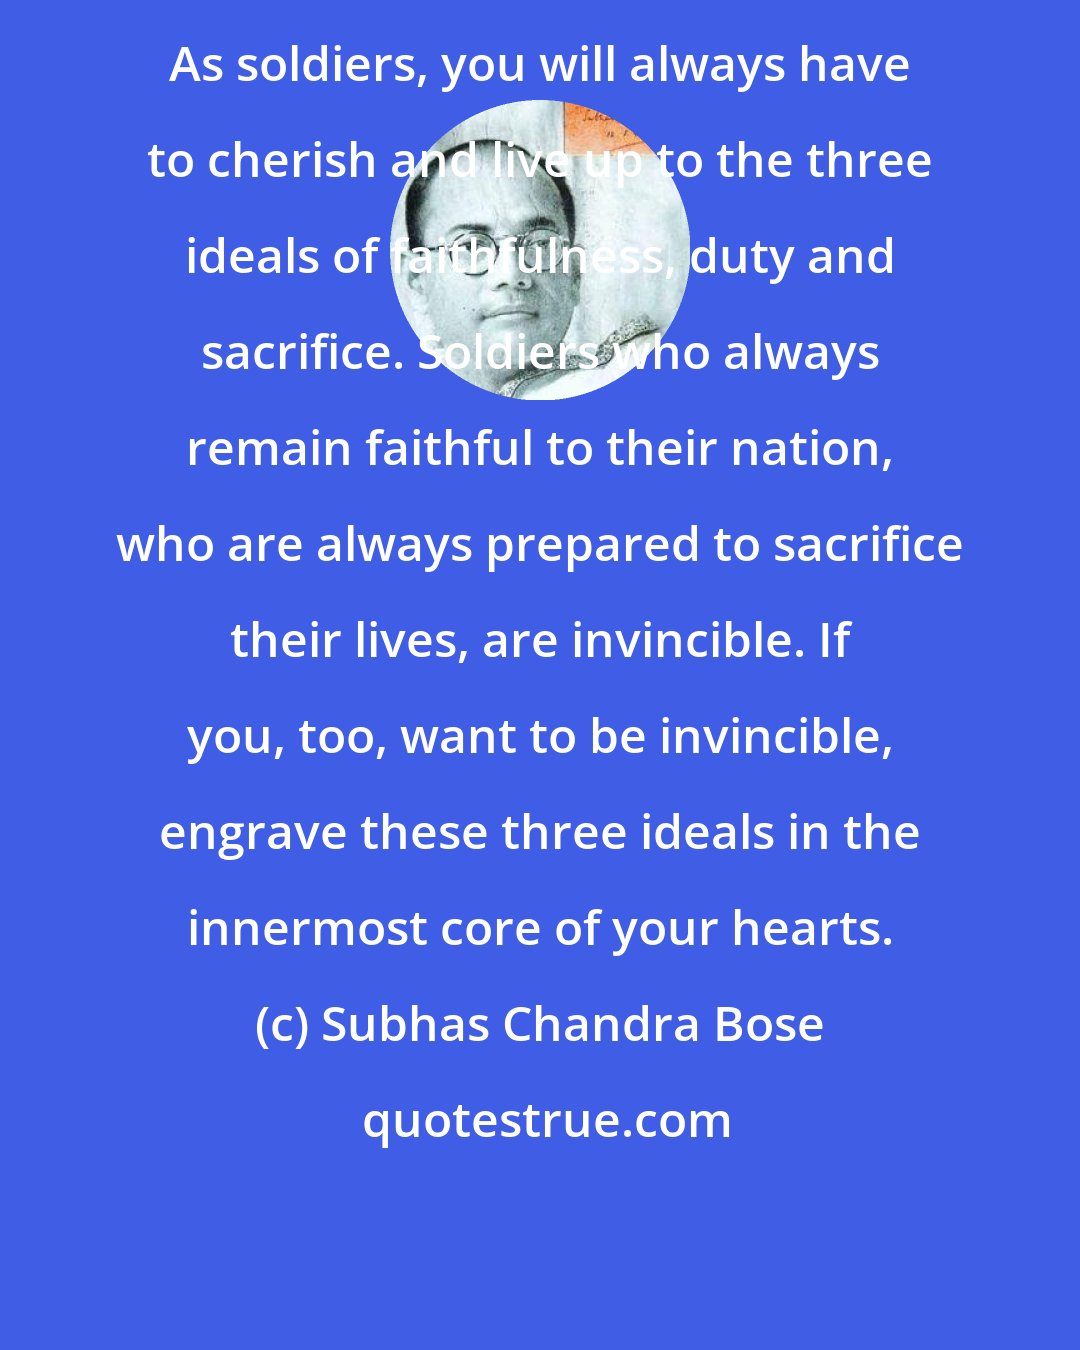 Subhas Chandra Bose: As soldiers, you will always have to cherish and live up to the three ideals of faithfulness, duty and sacrifice. Soldiers who always remain faithful to their nation, who are always prepared to sacrifice their lives, are invincible. If you, too, want to be invincible, engrave these three ideals in the innermost core of your hearts.